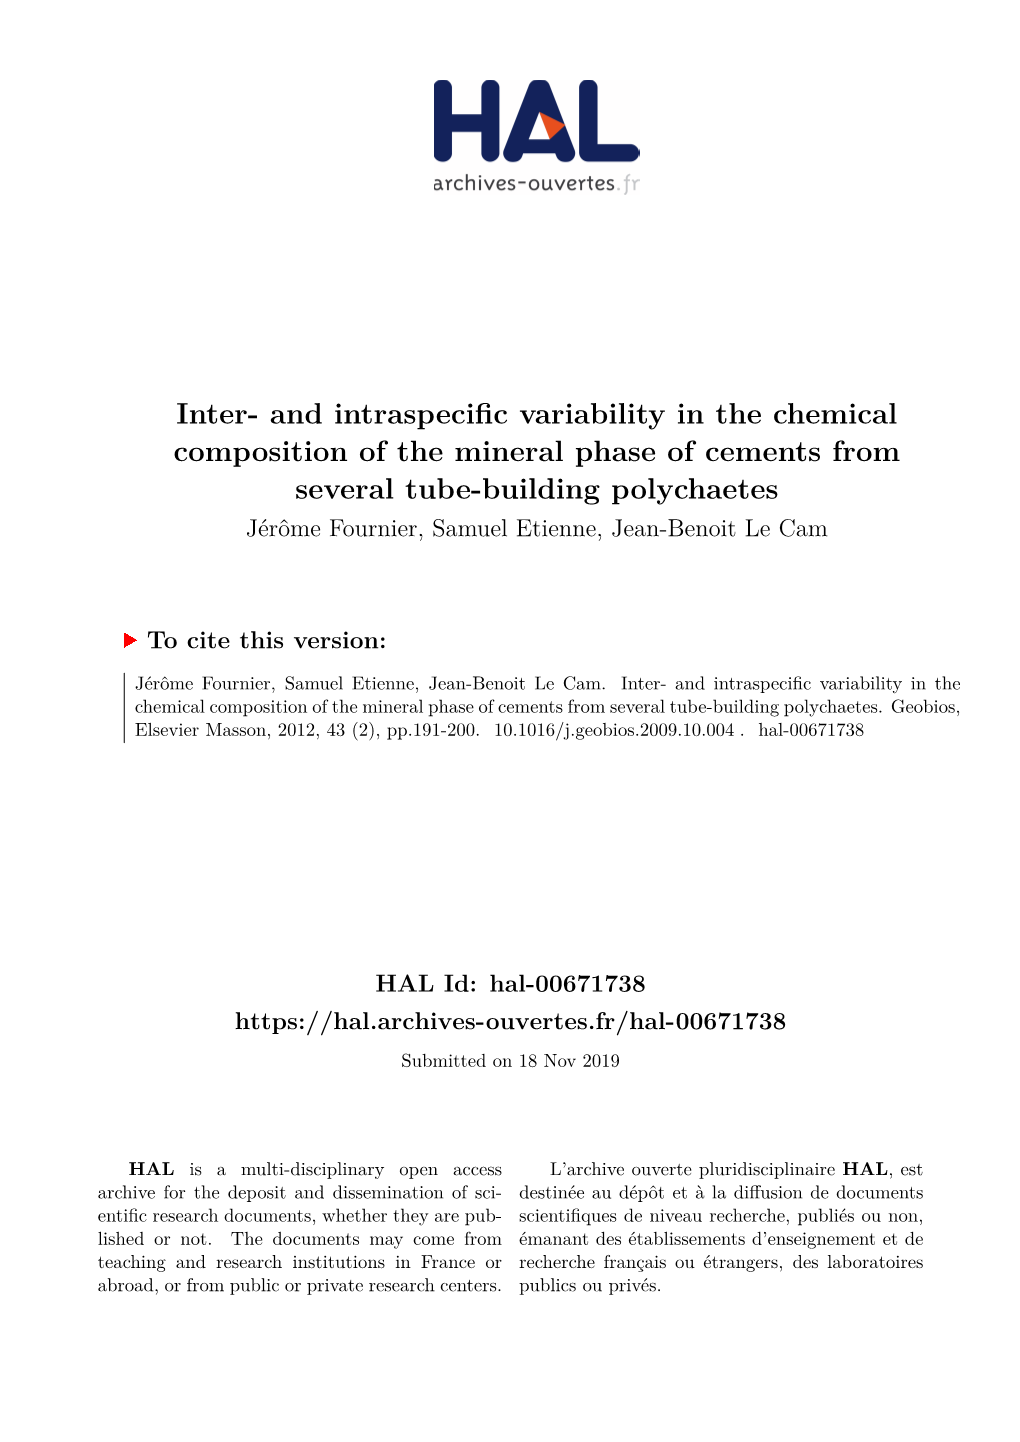 Inter- and Intraspecific Variability in the Chemical Composition of The